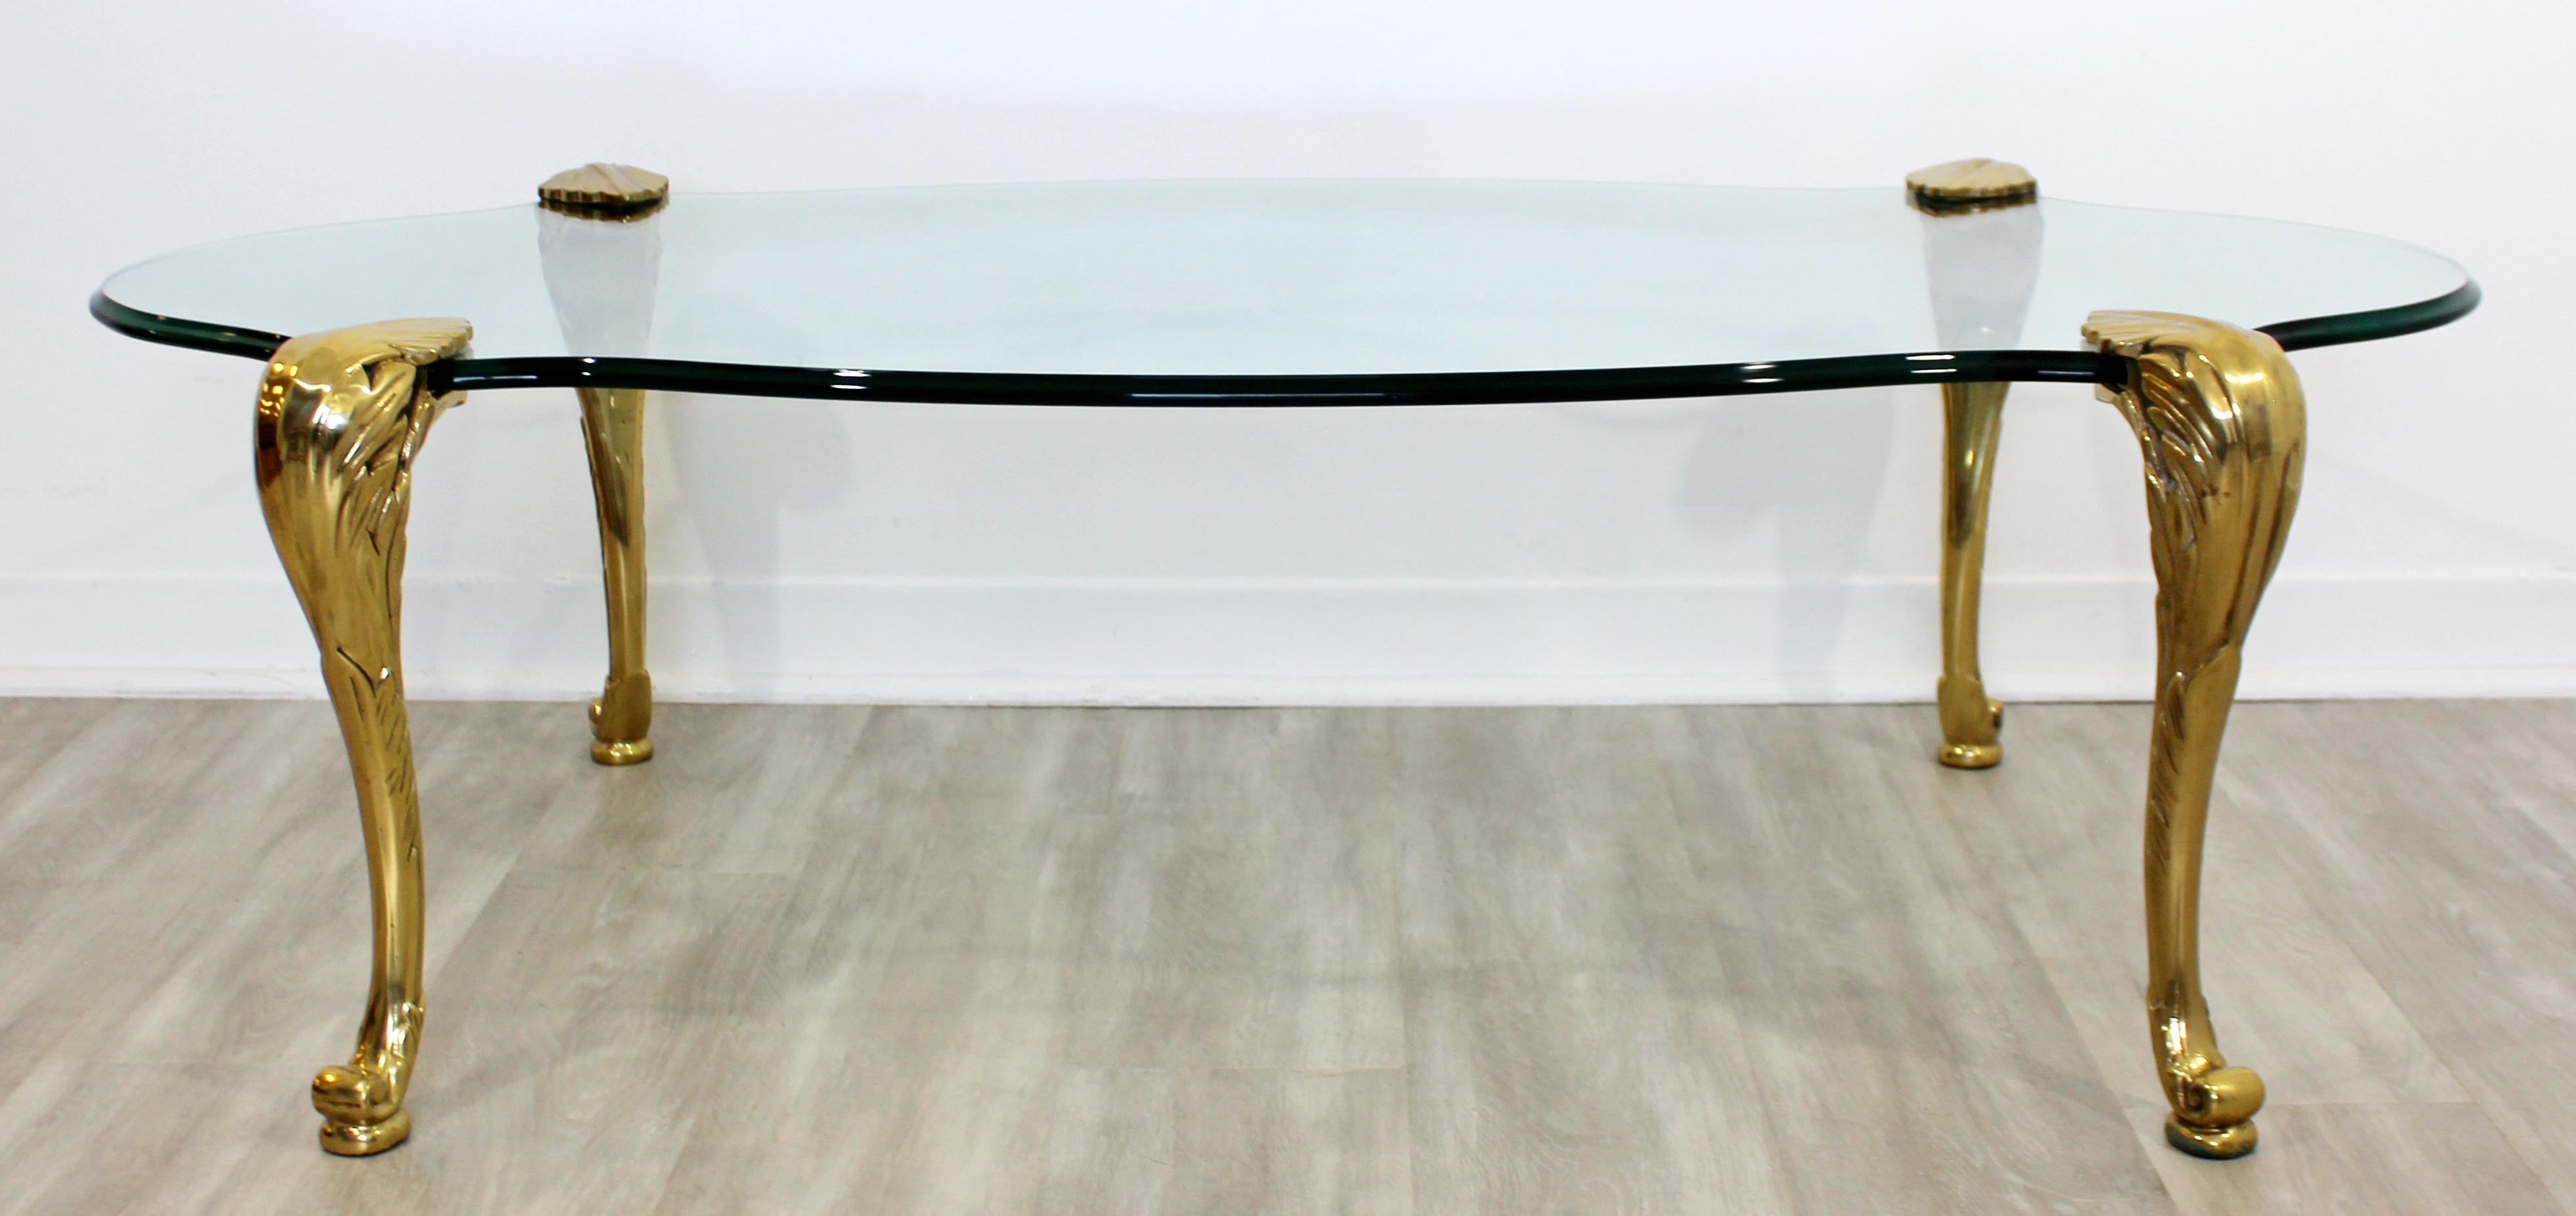 For your consideration is a phenomenally sculptural, brass and glass coffee table, attributed to P.E. Guerin, circa 1950s. In excellent vintage condition. The dimensions are 55